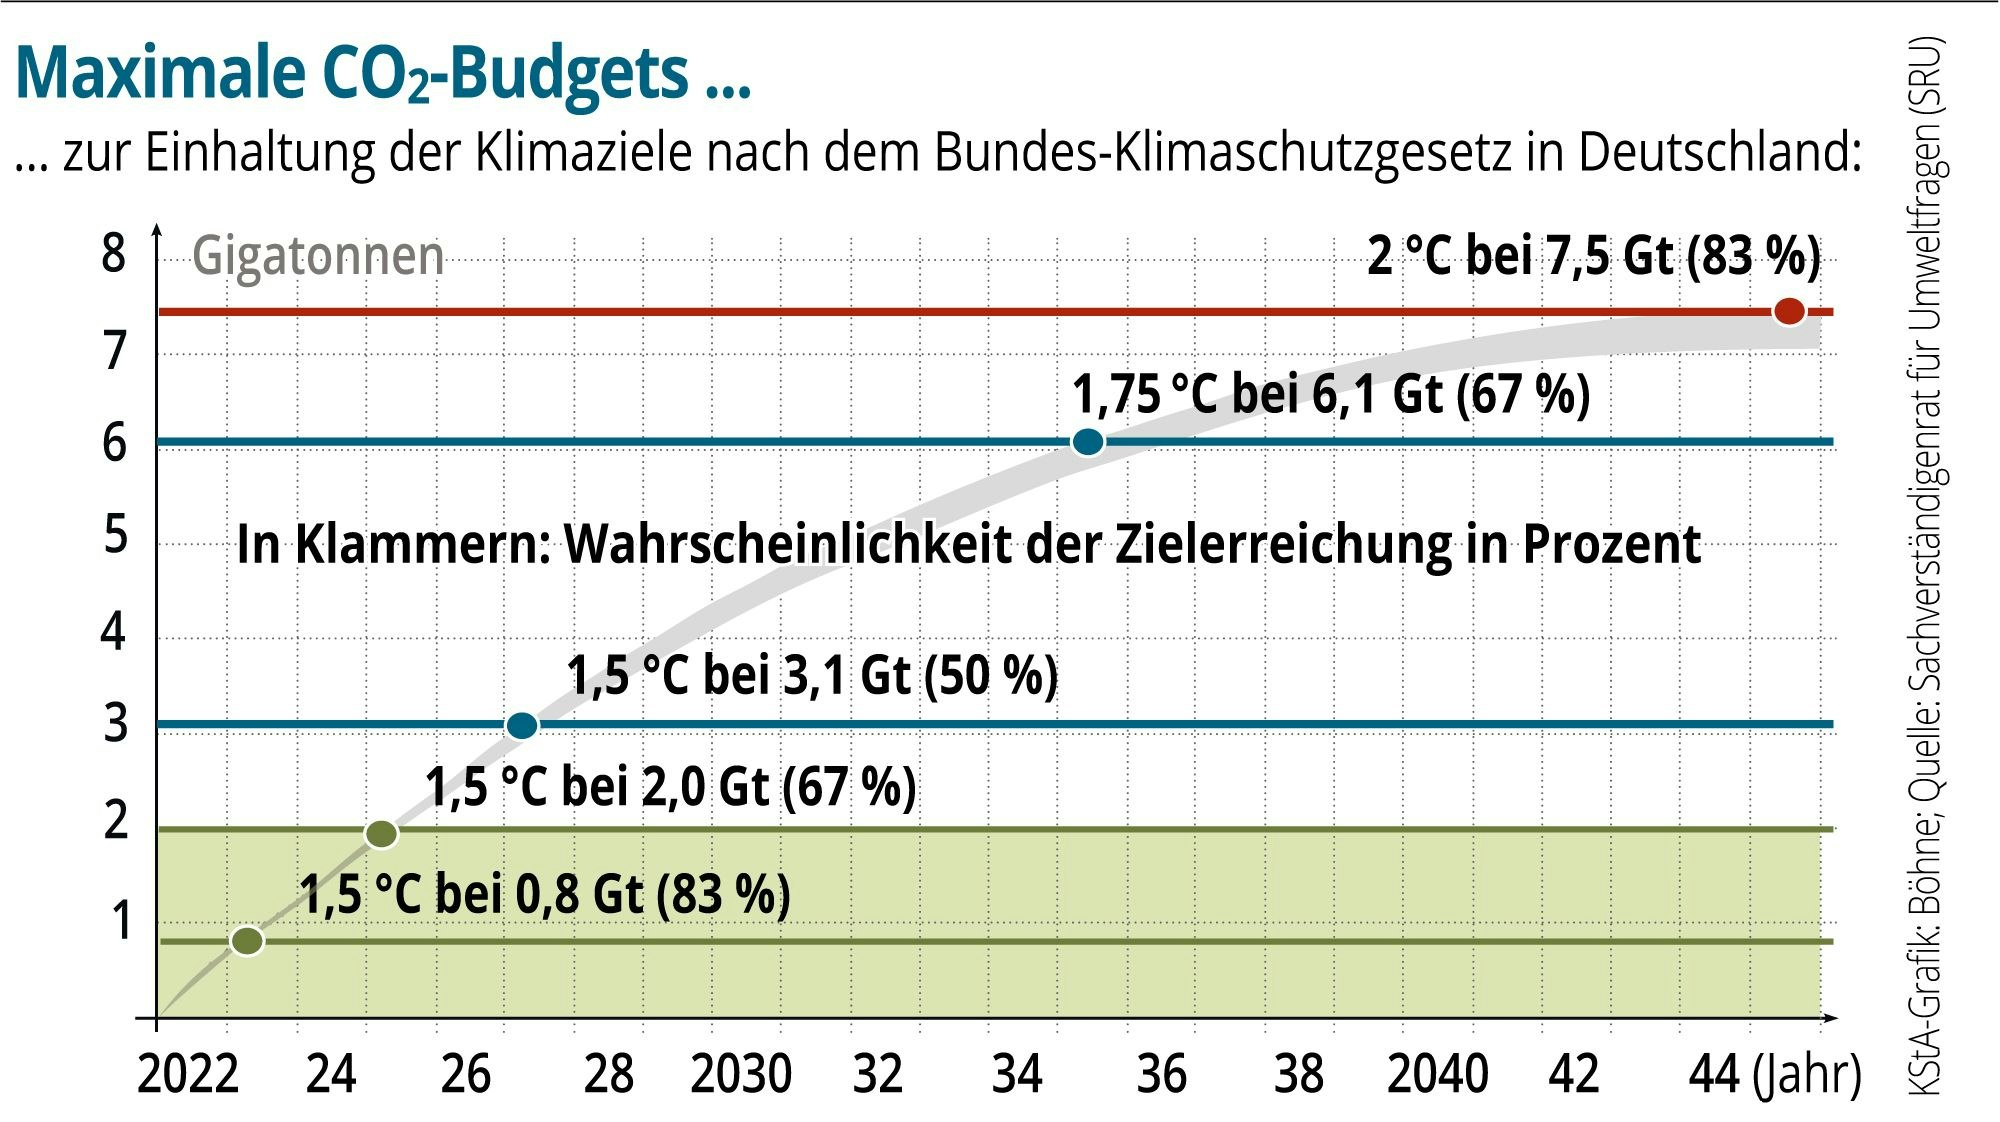 Maximale co2-Budgets